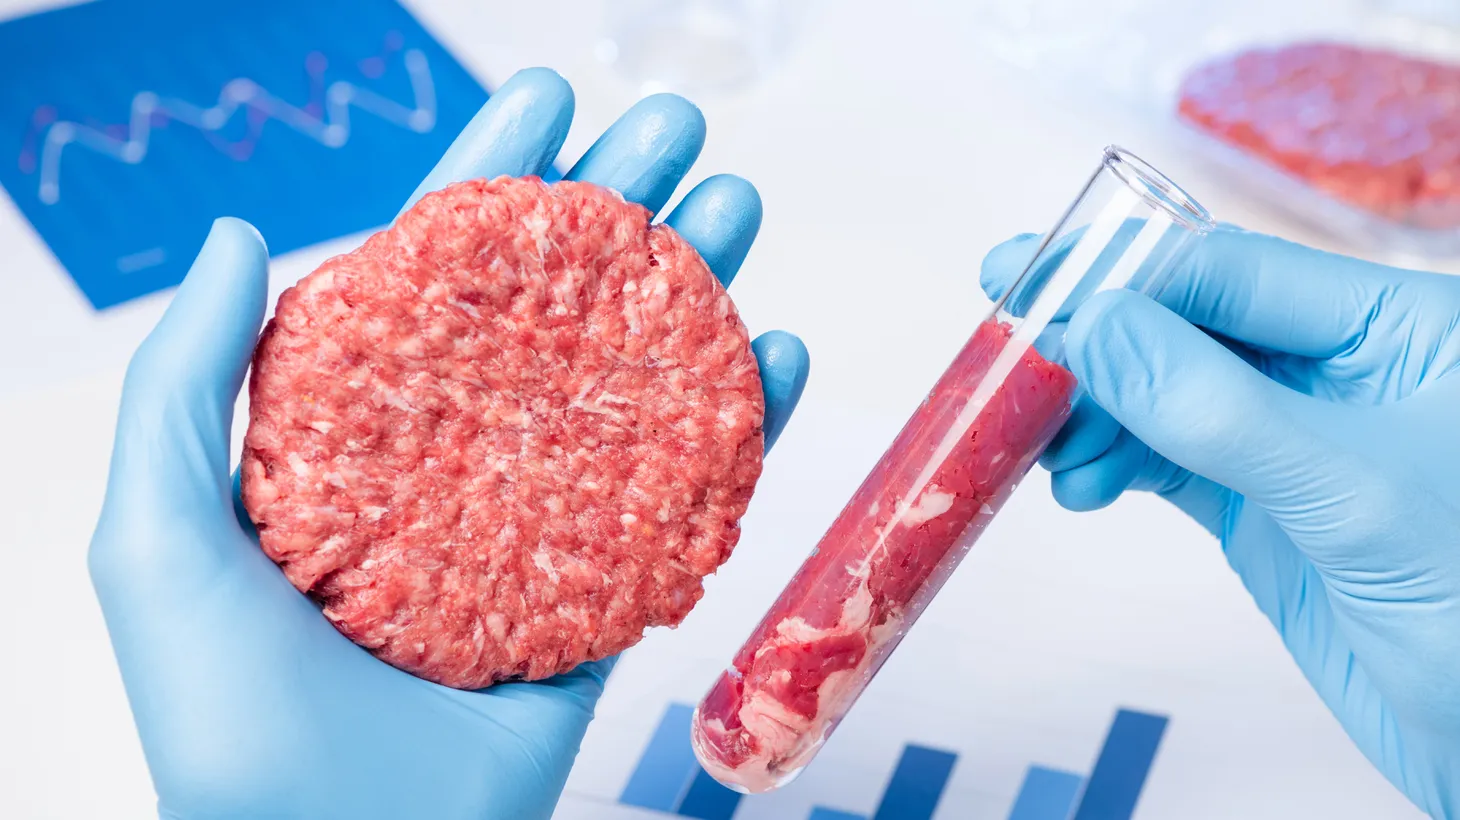 Cultured meat differs from plant-based products in that it is grown from a biopsy of animals.